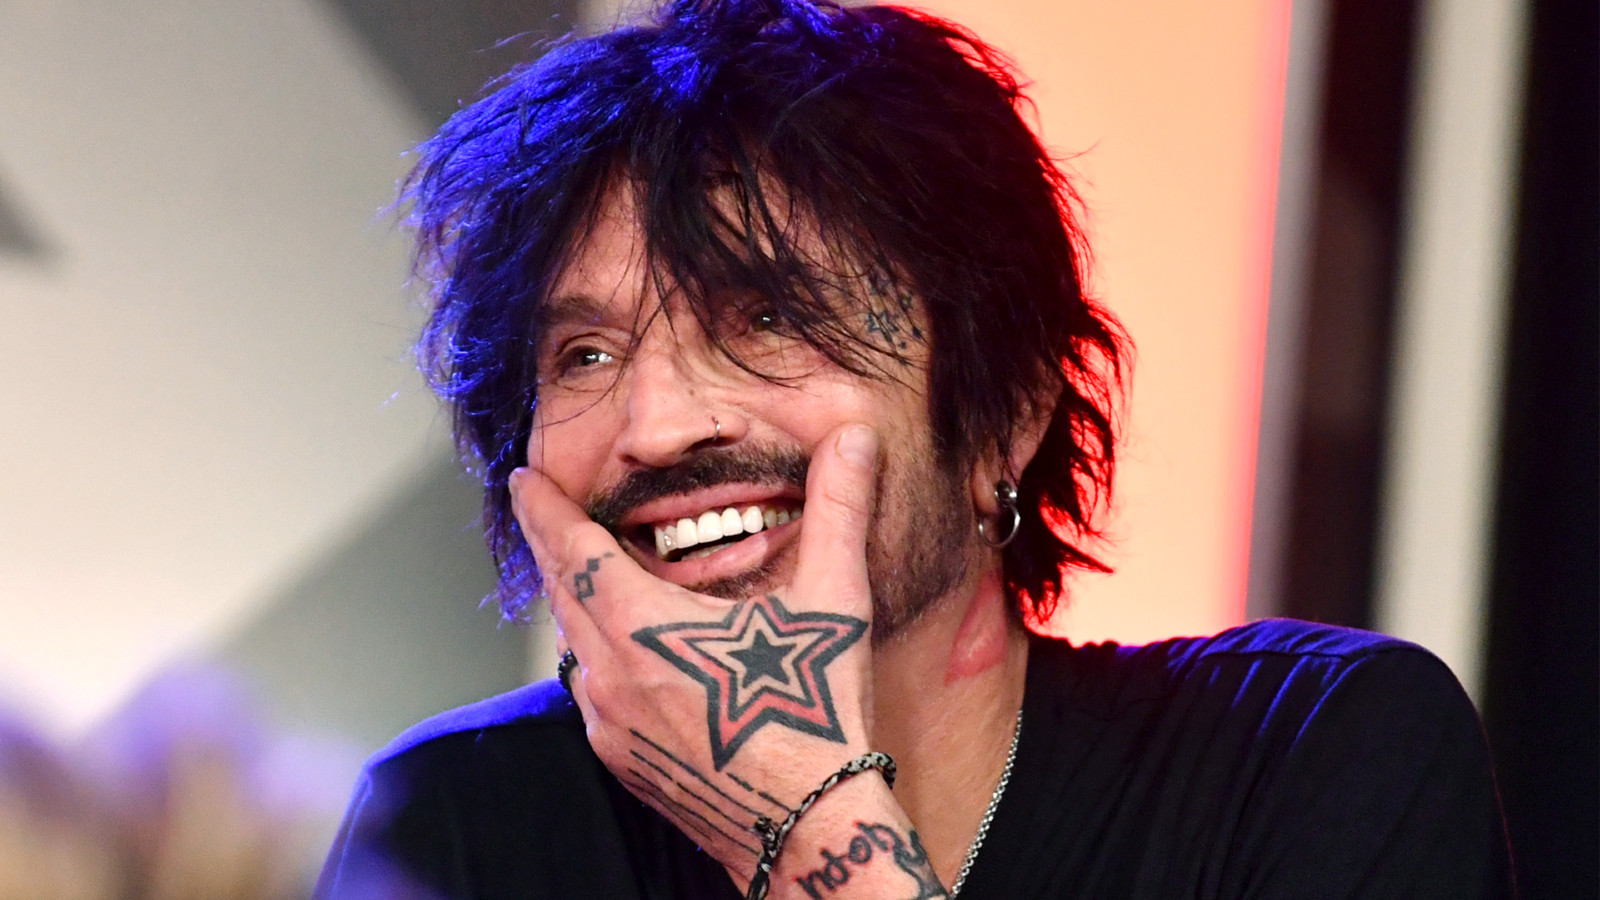 Tommy Lee of Motley Crue speaks during the press conference for THE STADIUM TOUR DEF LEPPARD - MOTLEY CRUE - POISON at SiriusXM Studios on December 04, 2019 in Los Angeles, California.